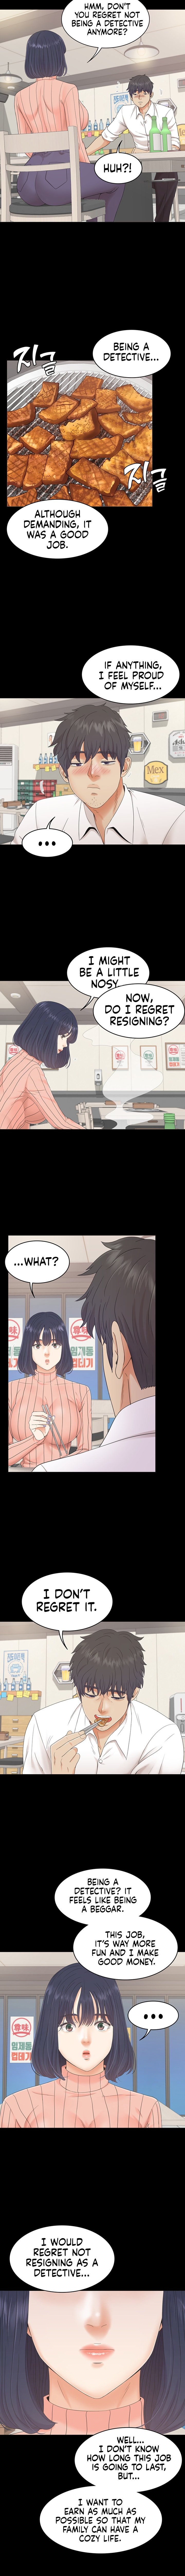 stuck-in-time-chap-3-3